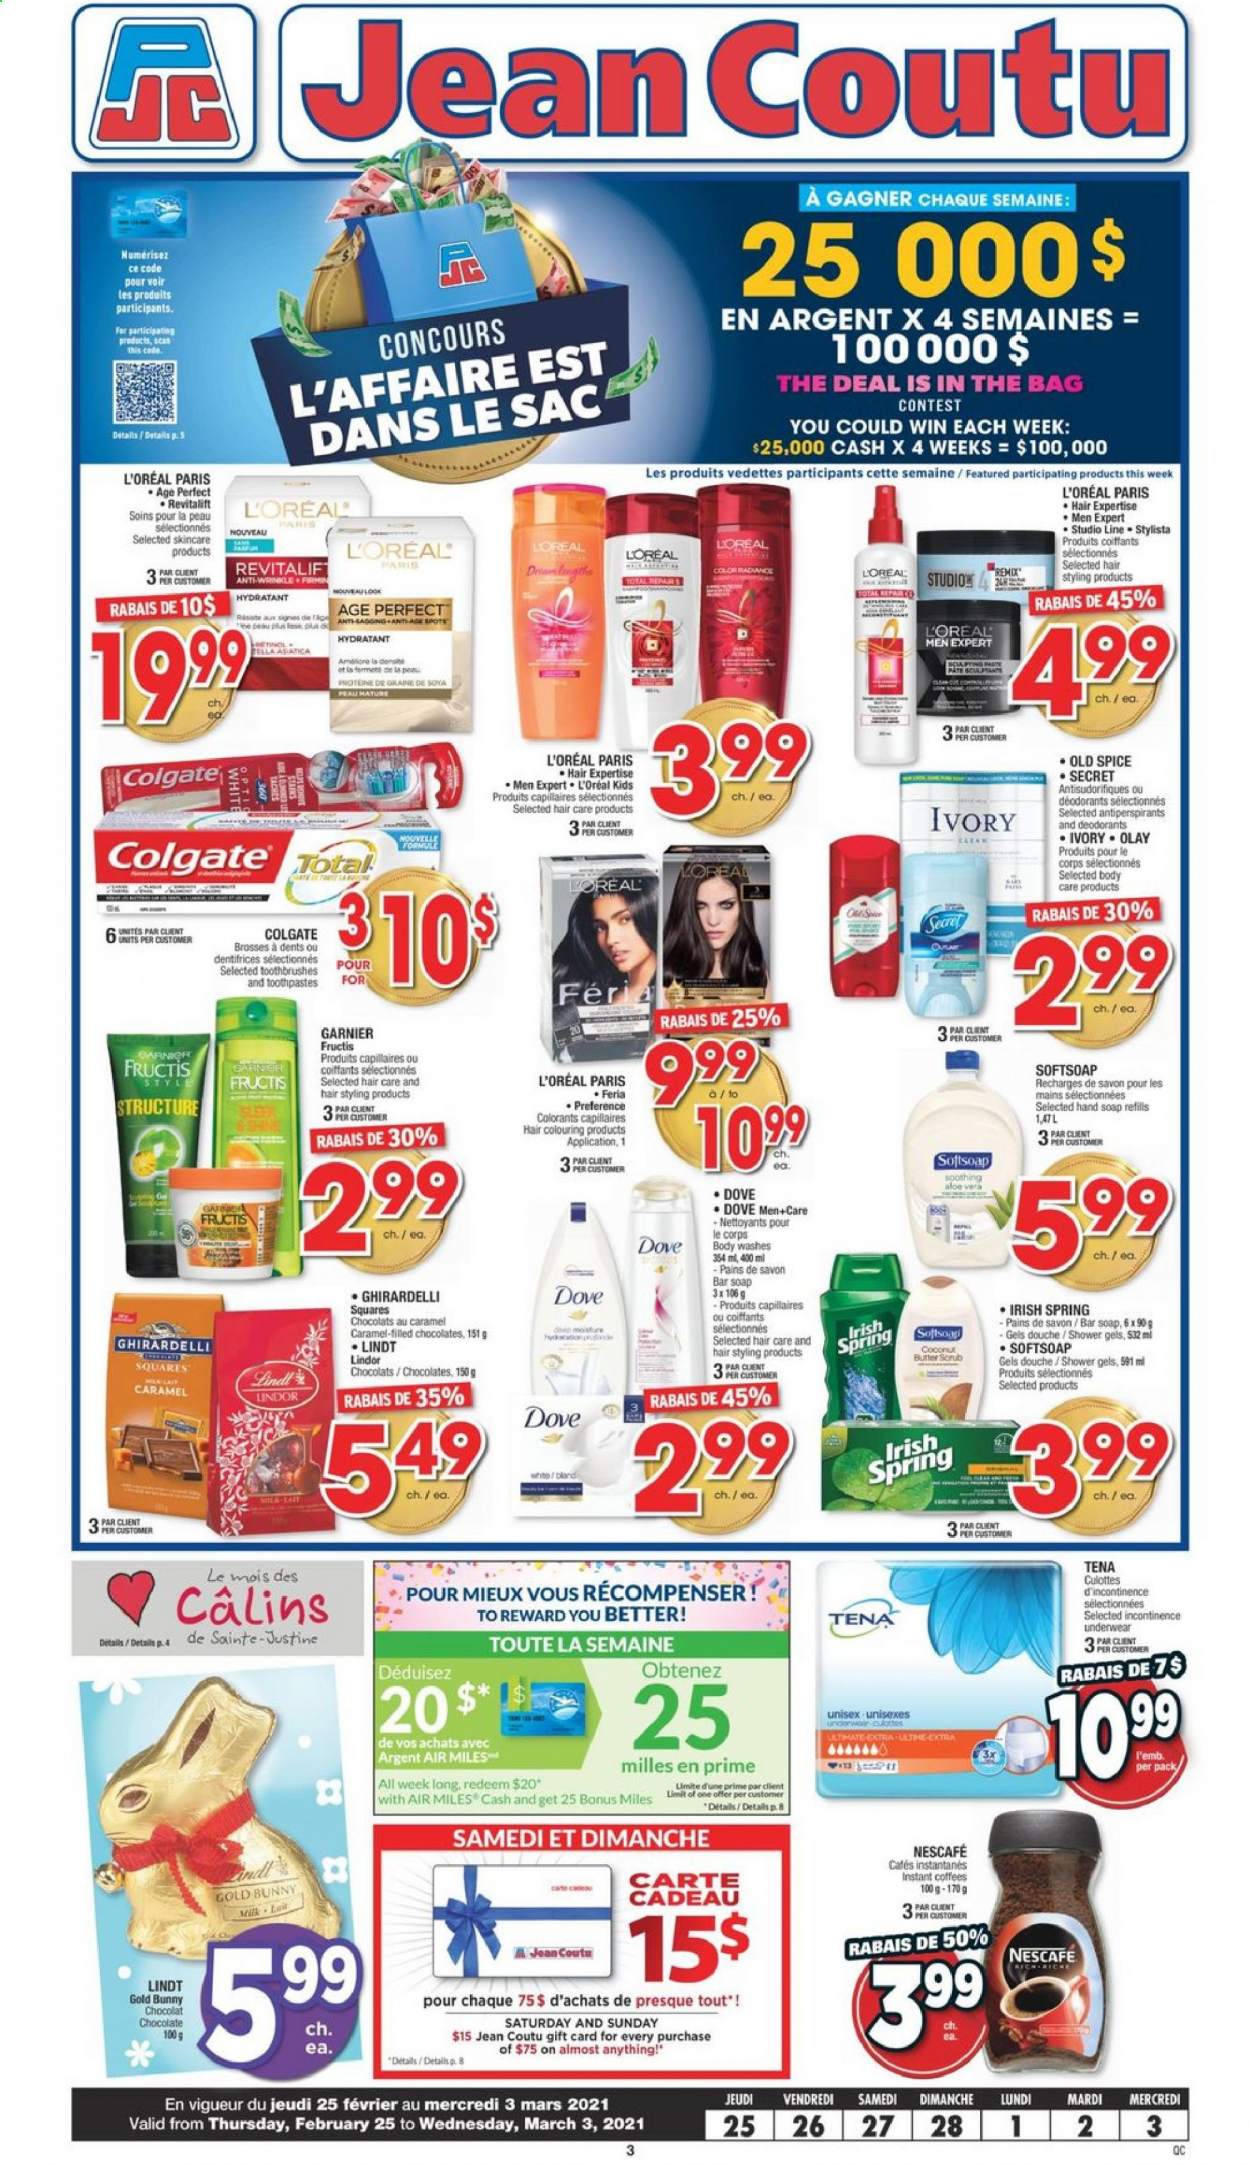 thumbnail - Jean Coutu Flyer - February 25, 2021 - March 03, 2021 - Sales products - chocolate, Mars, Ghirardelli, spice, Softsoap, hand soap, soap bar, soap, incontinence underwear, L’Oréal, Olay, L’Oréal Men, Fructis, Garnier, Old Spice, Nescafé, deodorant. Page 1.